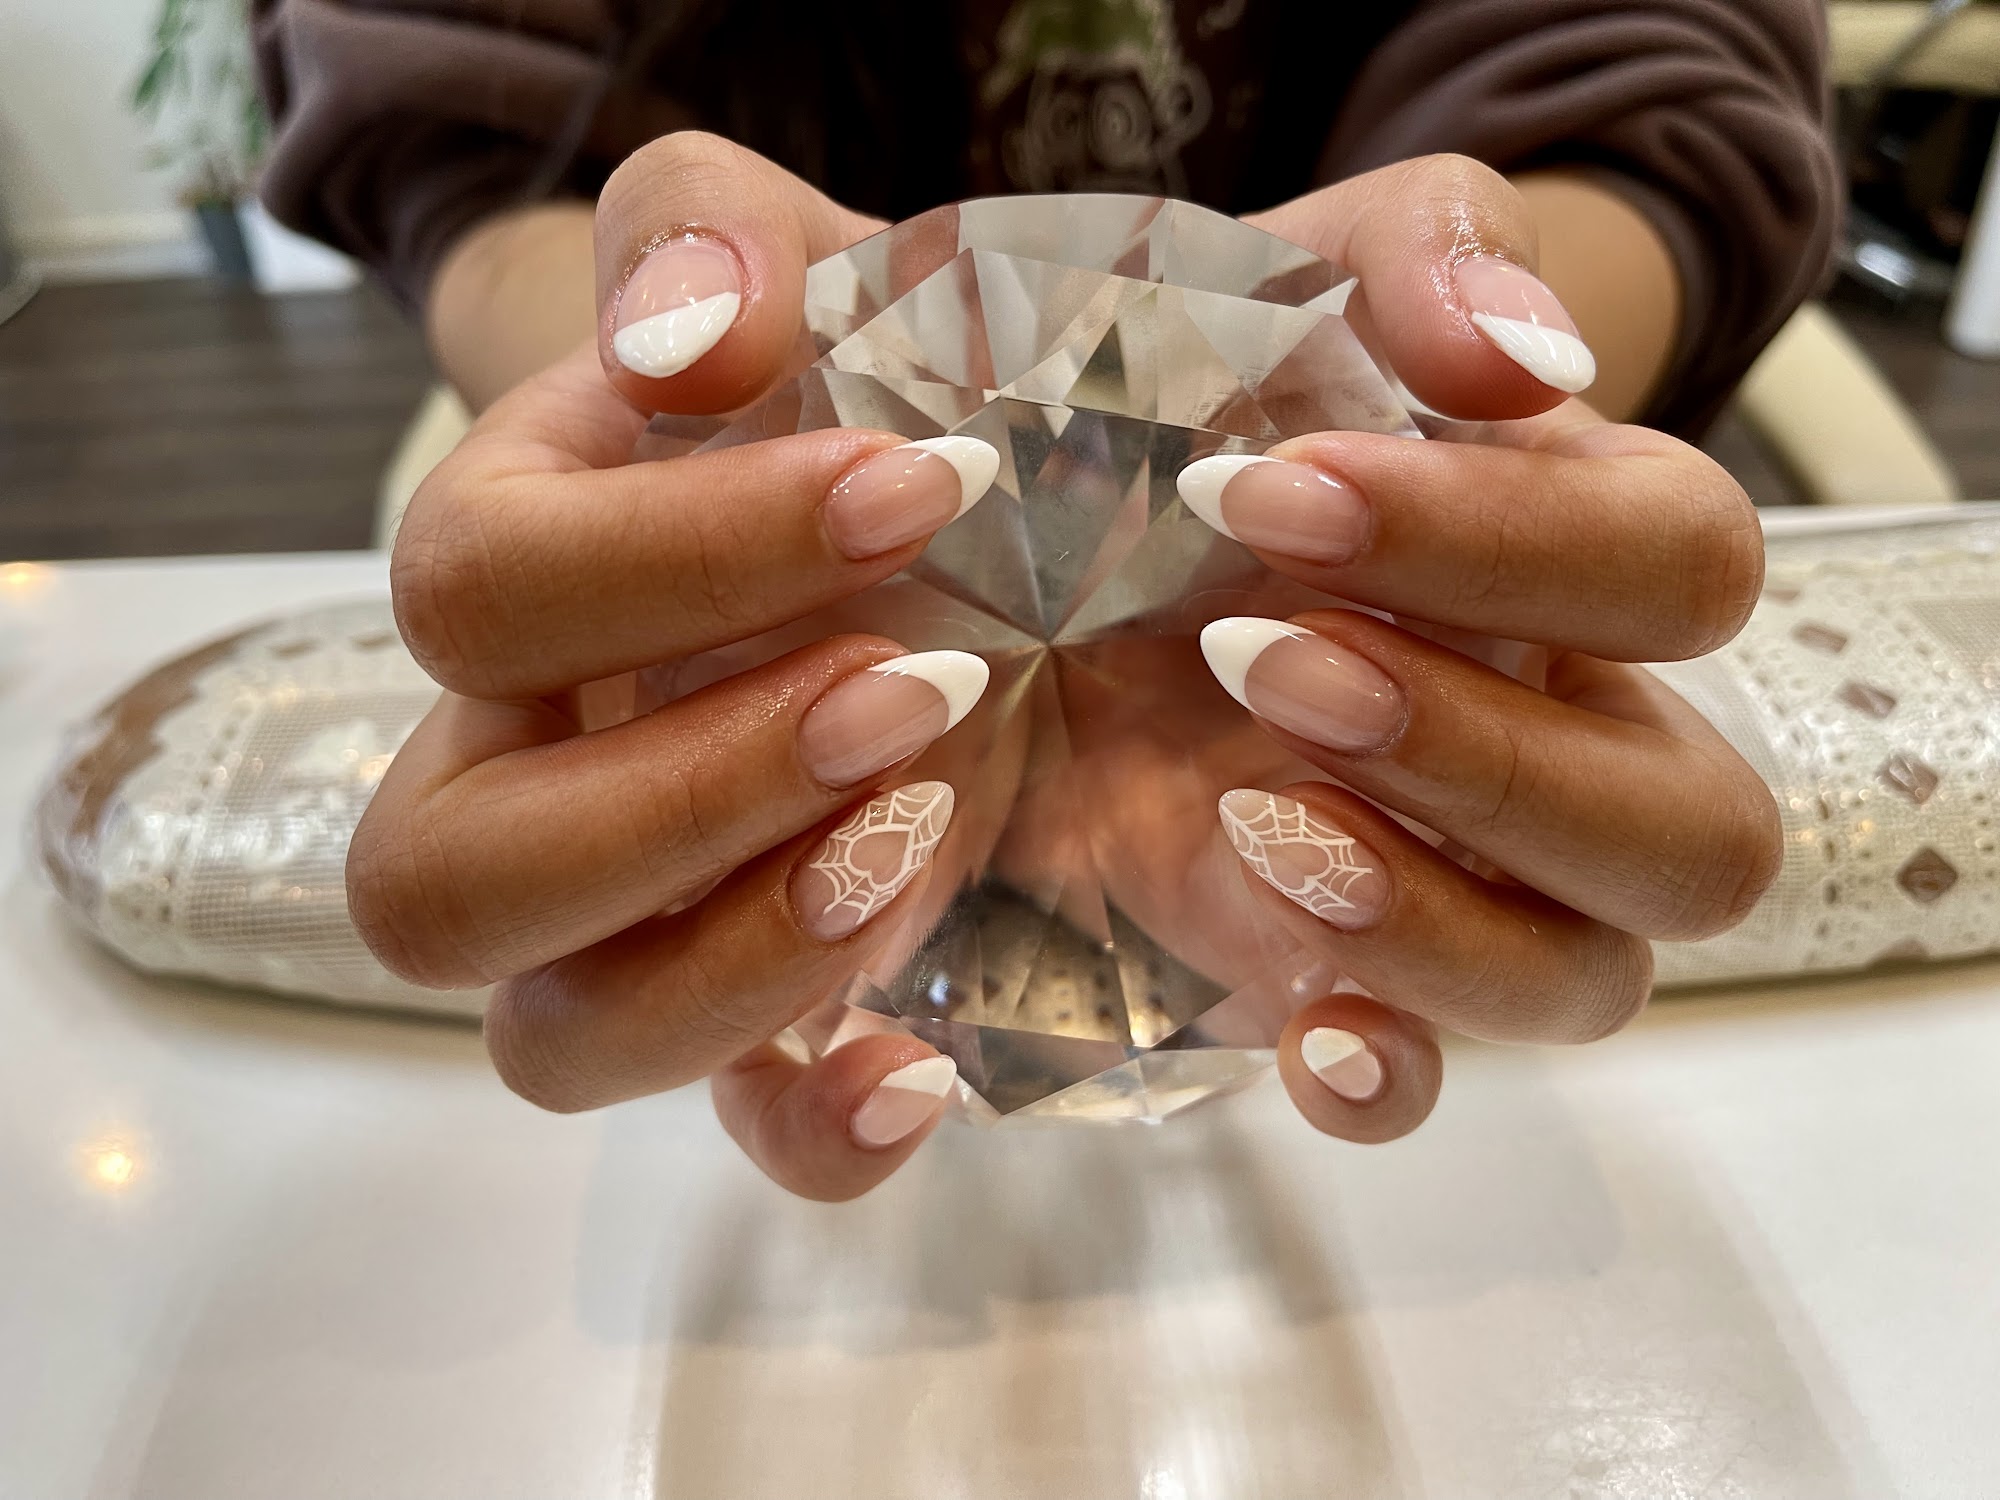 French Nails & Spa 364 River Rd, New Milford New Jersey 07646